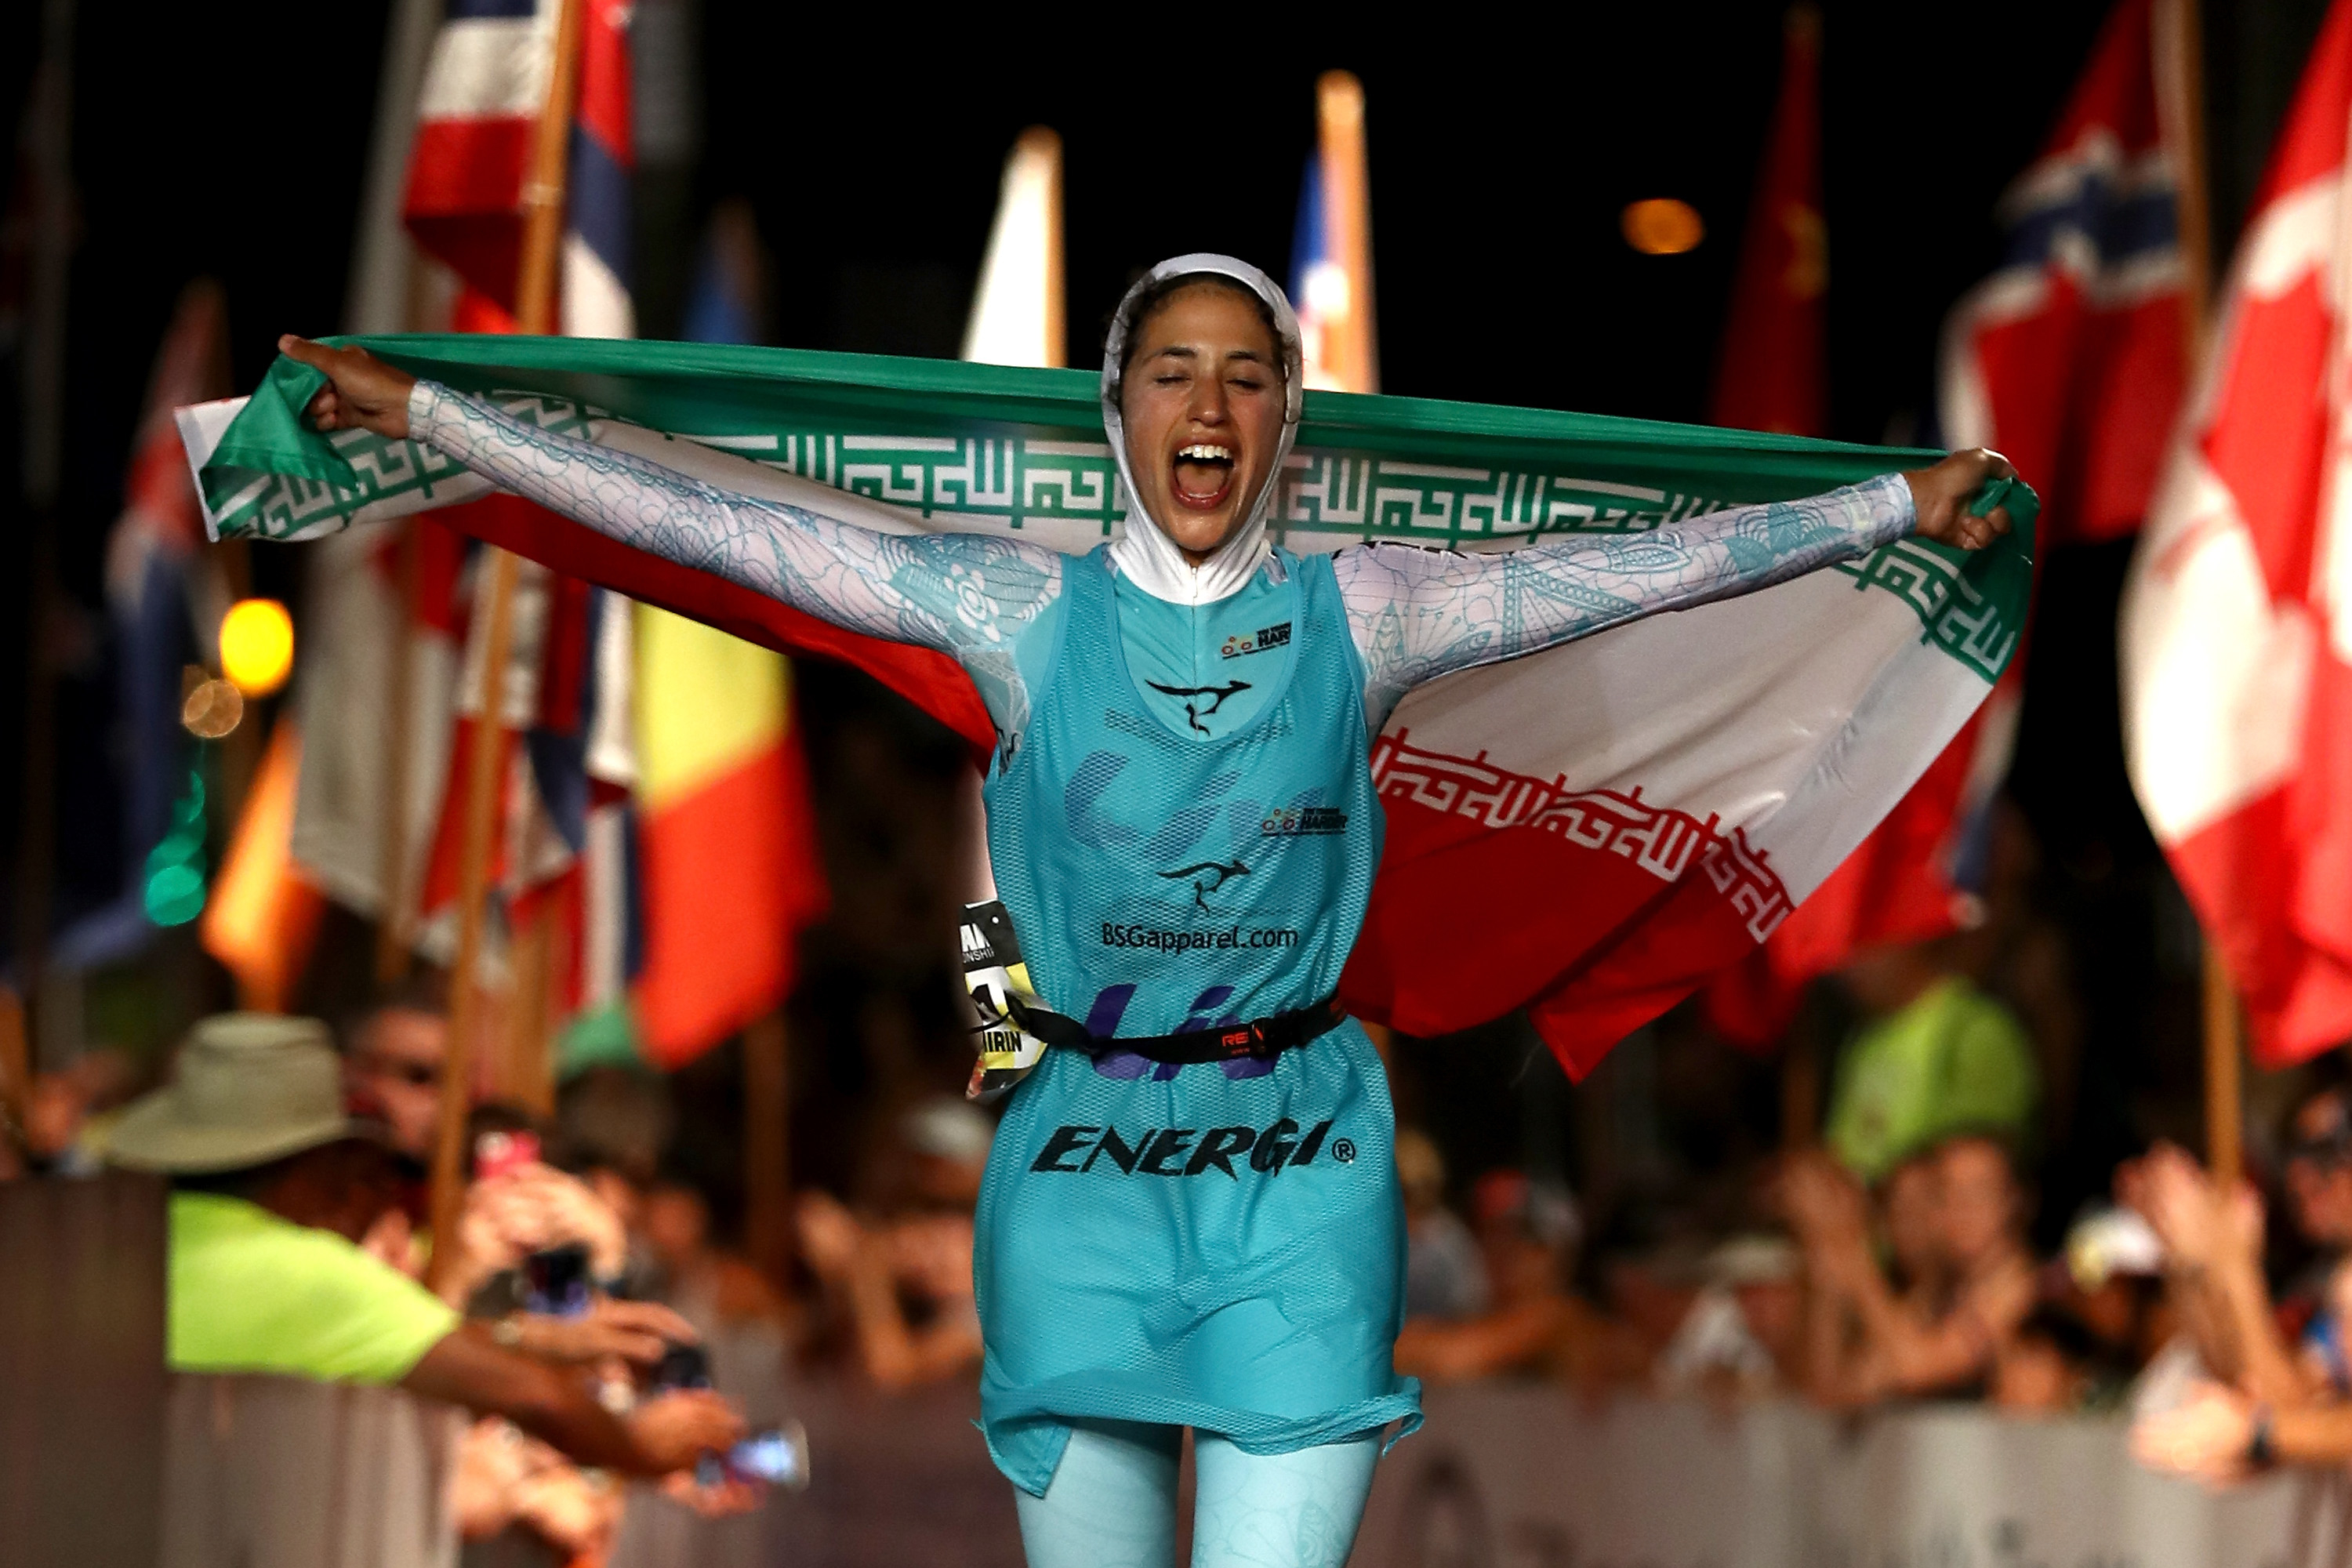 Shirin Gerami holding Iranian flag high with other flags in background; expressing triumph